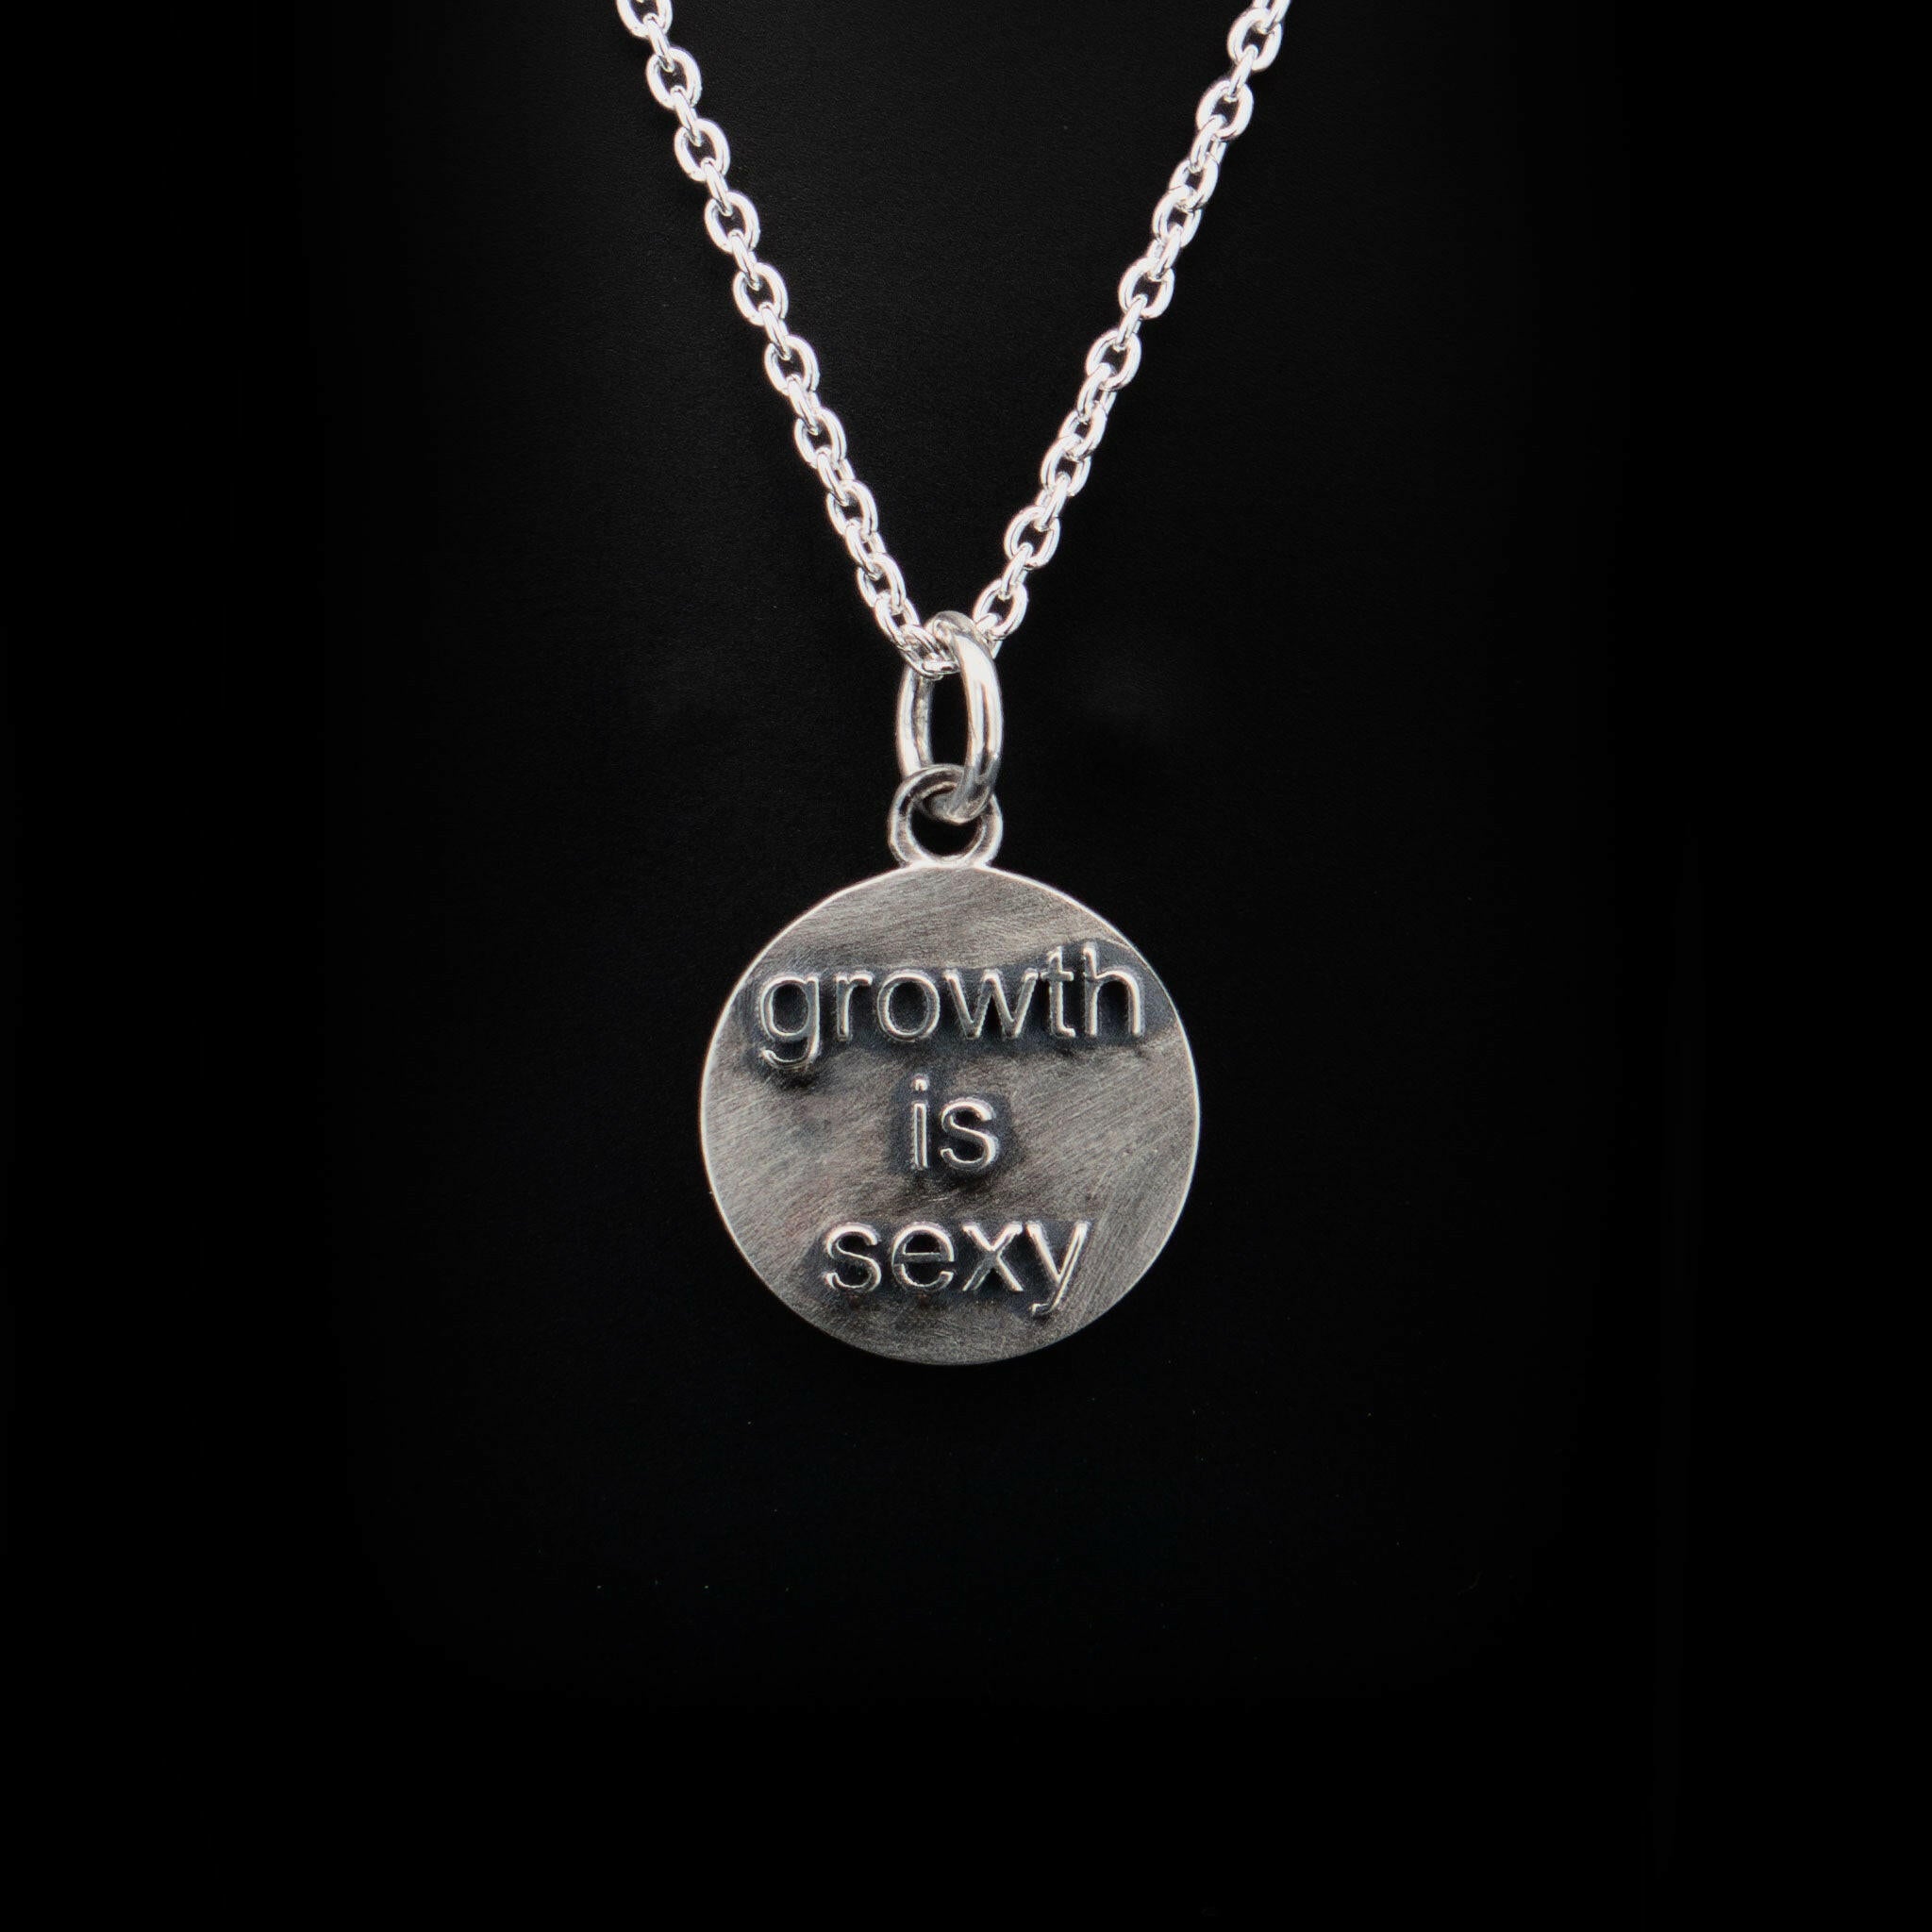 back center of sterling silver round pendant. text reads "growth is sexy" attached to a sterling silver chain and  bail.